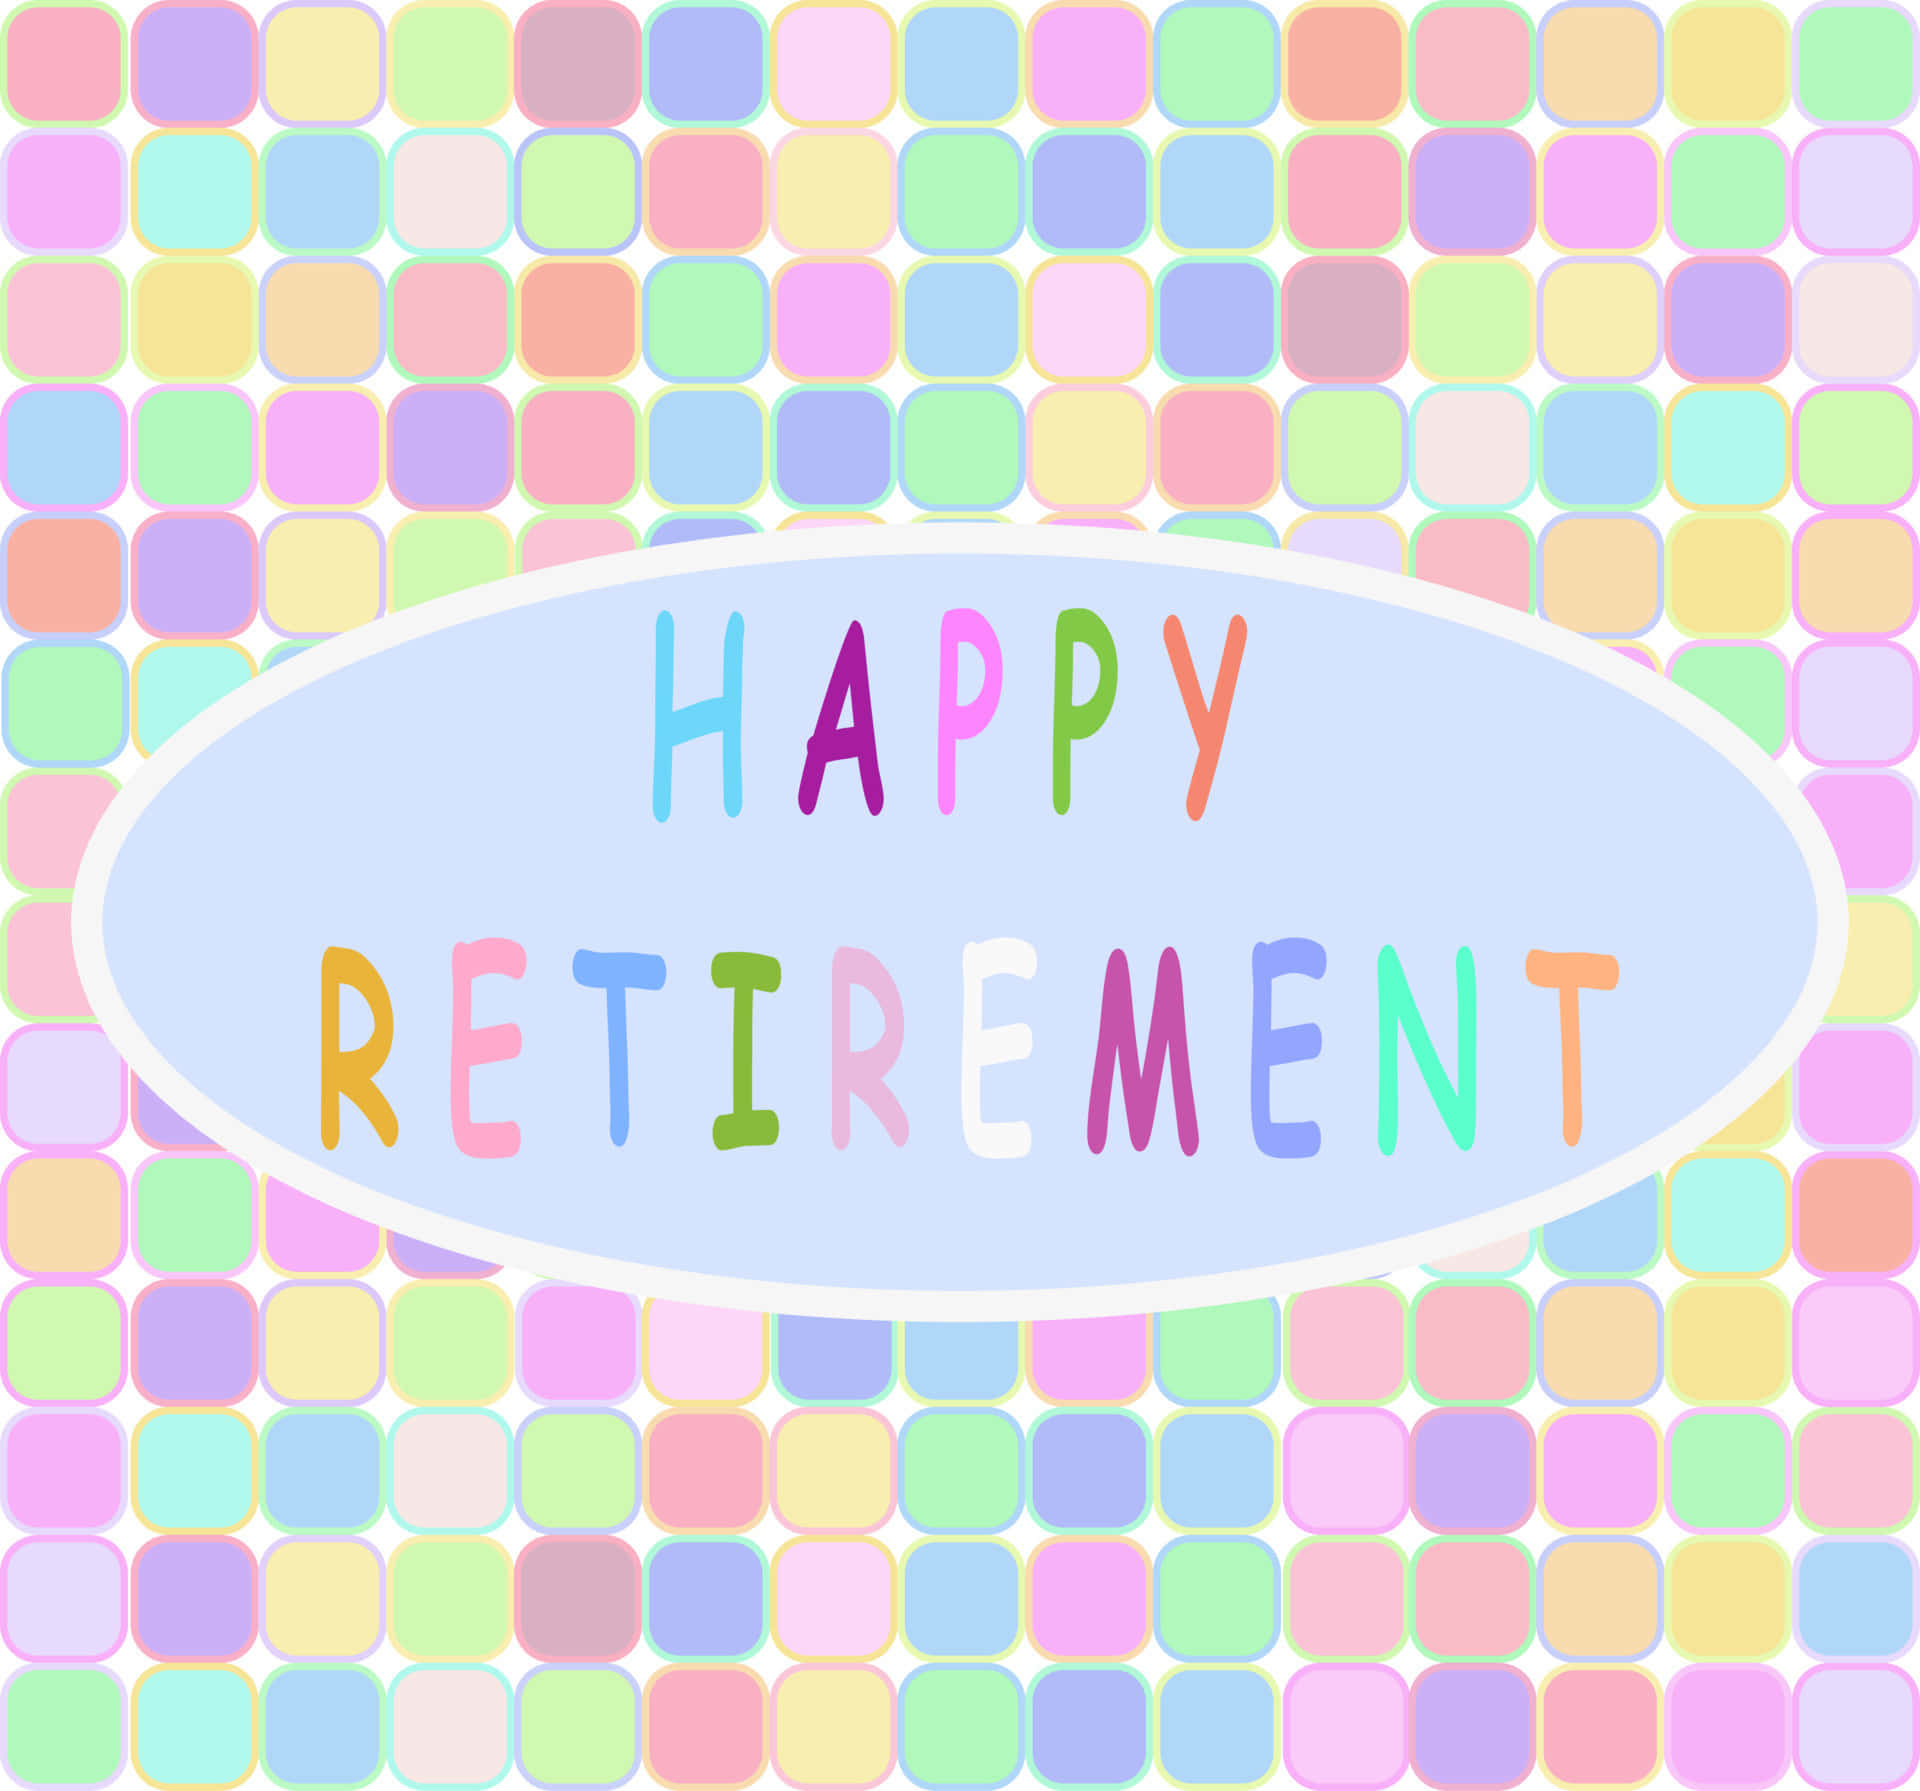 Happy Retirement Greeting Card With Colorful Dots On A Background